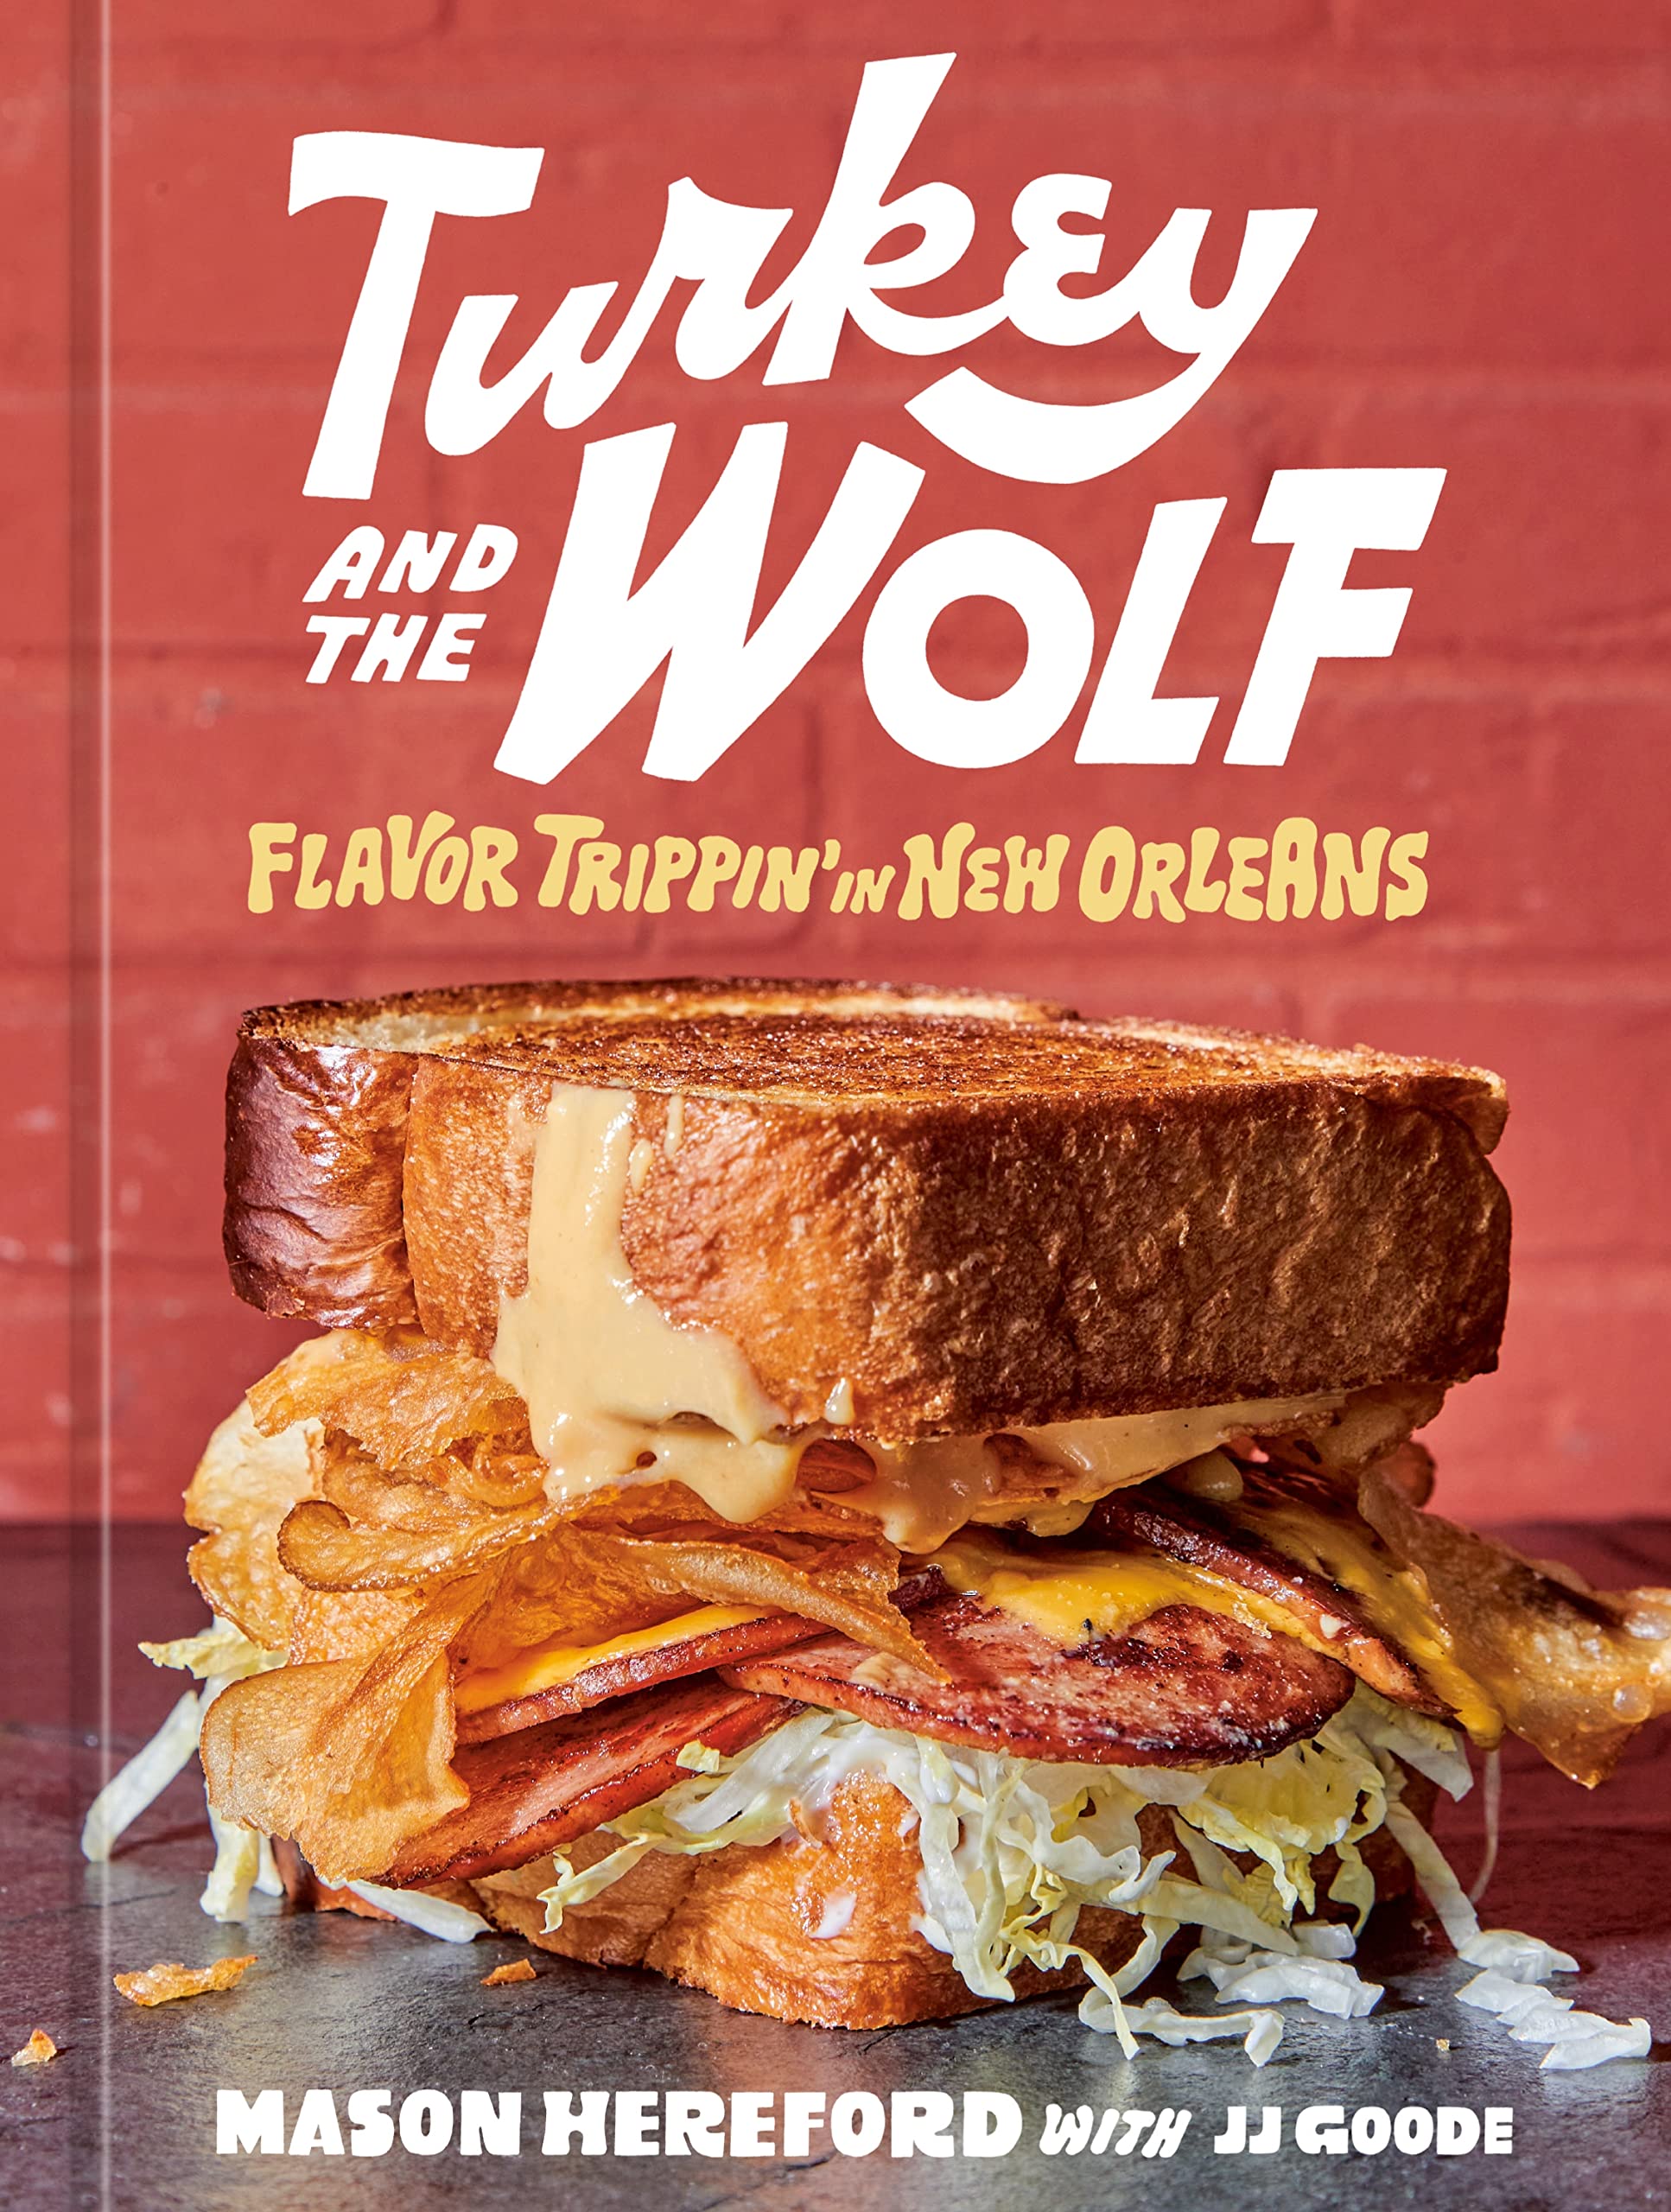 Turkey and the Wolf: Flavor Trippin’ in New Orleans